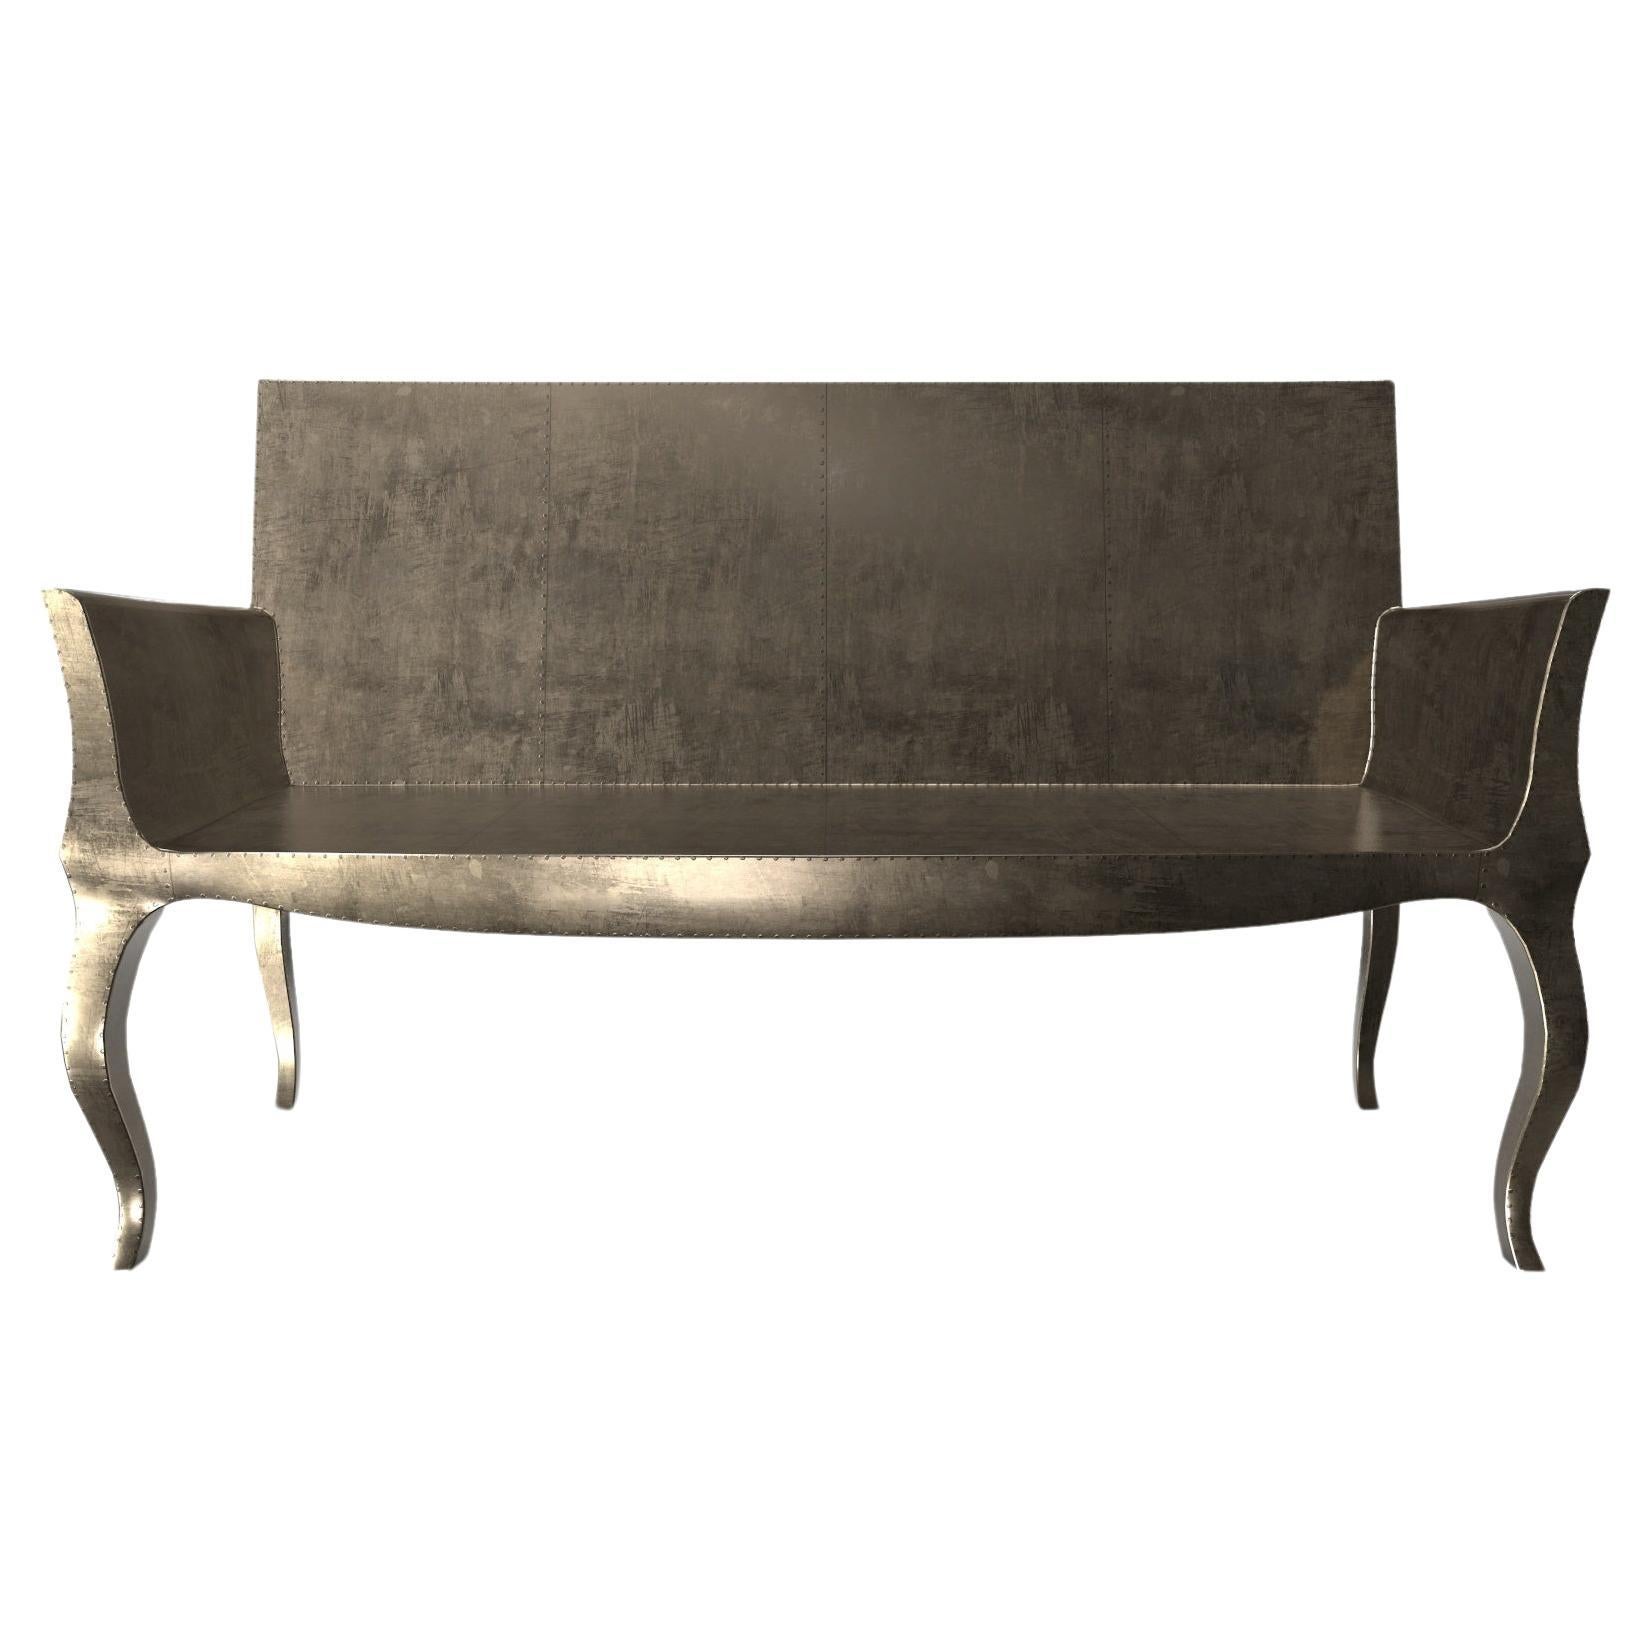 Louise Settee Art Deco Benches in Smooth Antique Bronze by Paul Mathieu